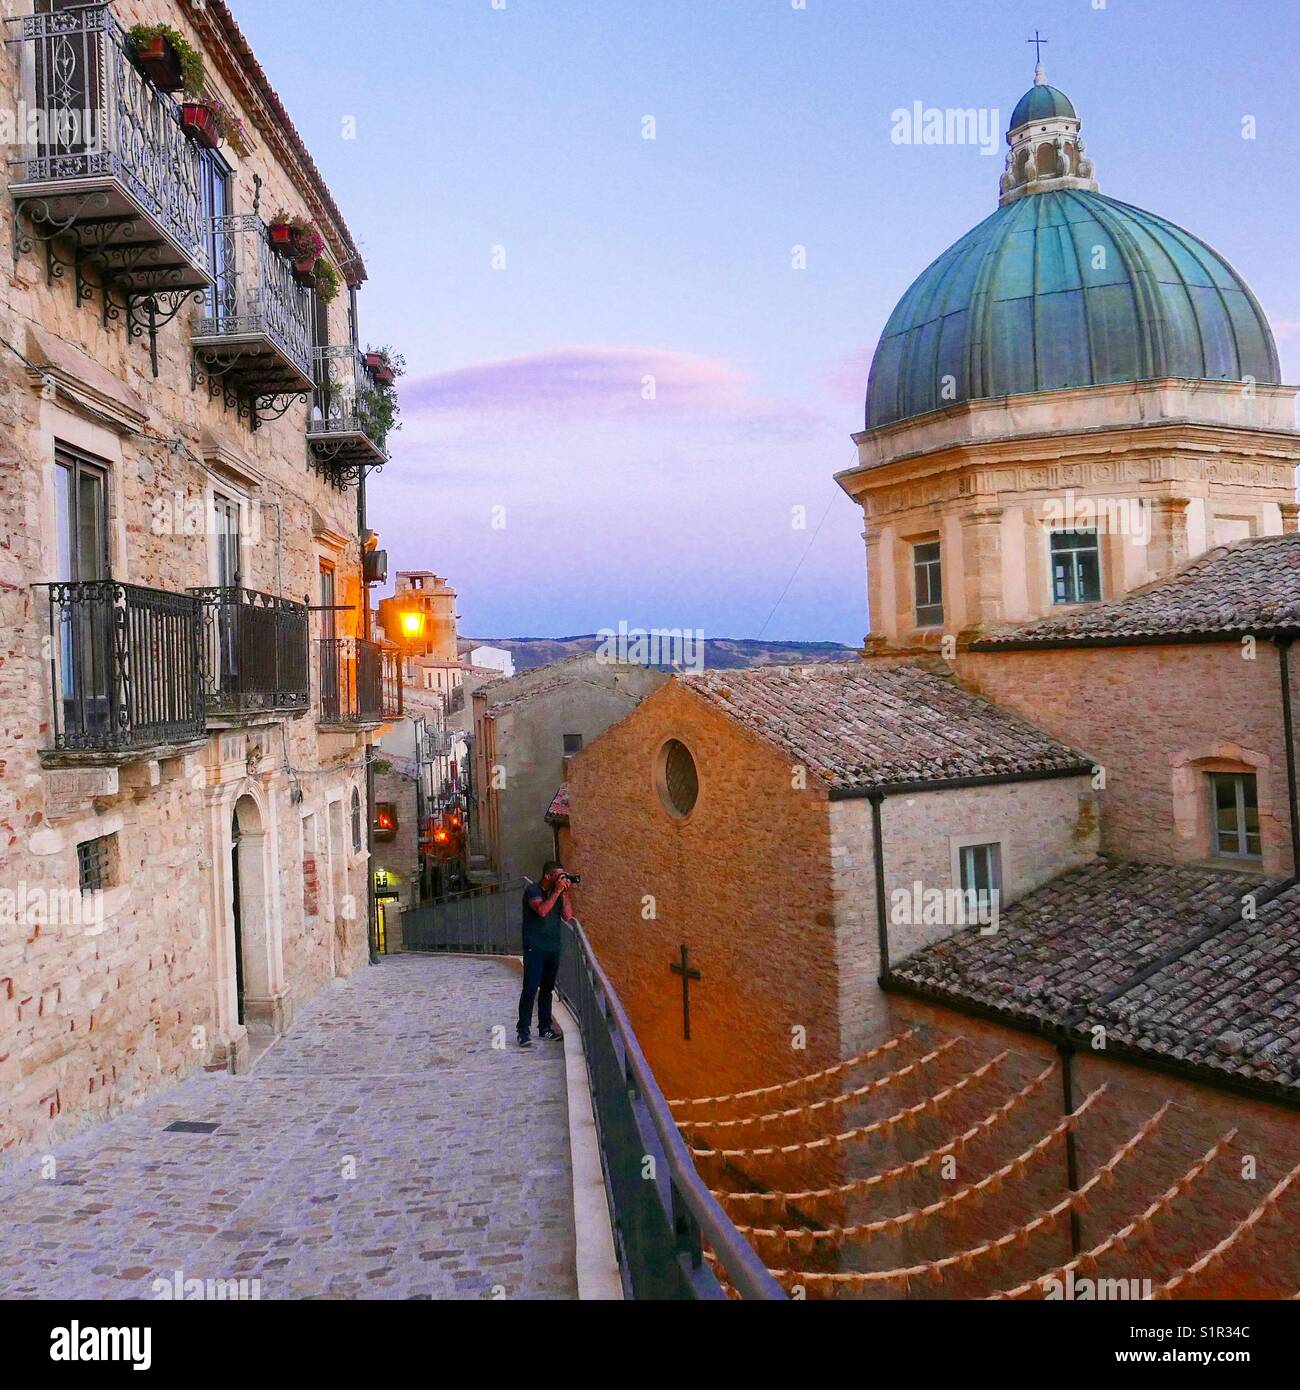 Walking through the narrow streets of ancien sicilian village of Gangi, with the dome of the Cathedral on the right, enlighted by colors of the sunset. Gangi, Palermo, Sicily. Italy. Stock Photo